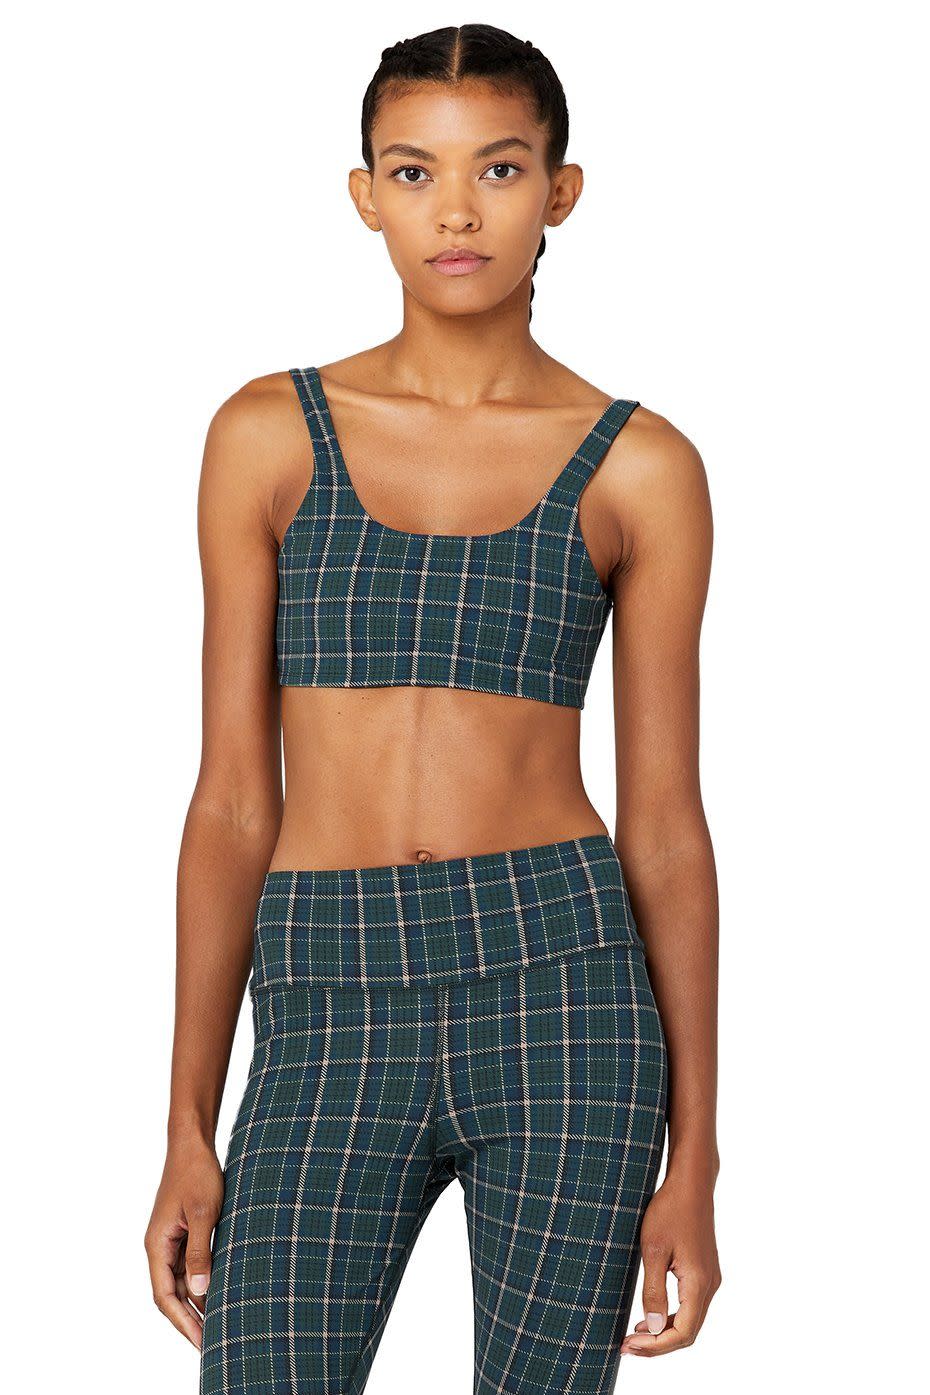 5) Occasion Bra in Forest Plaid